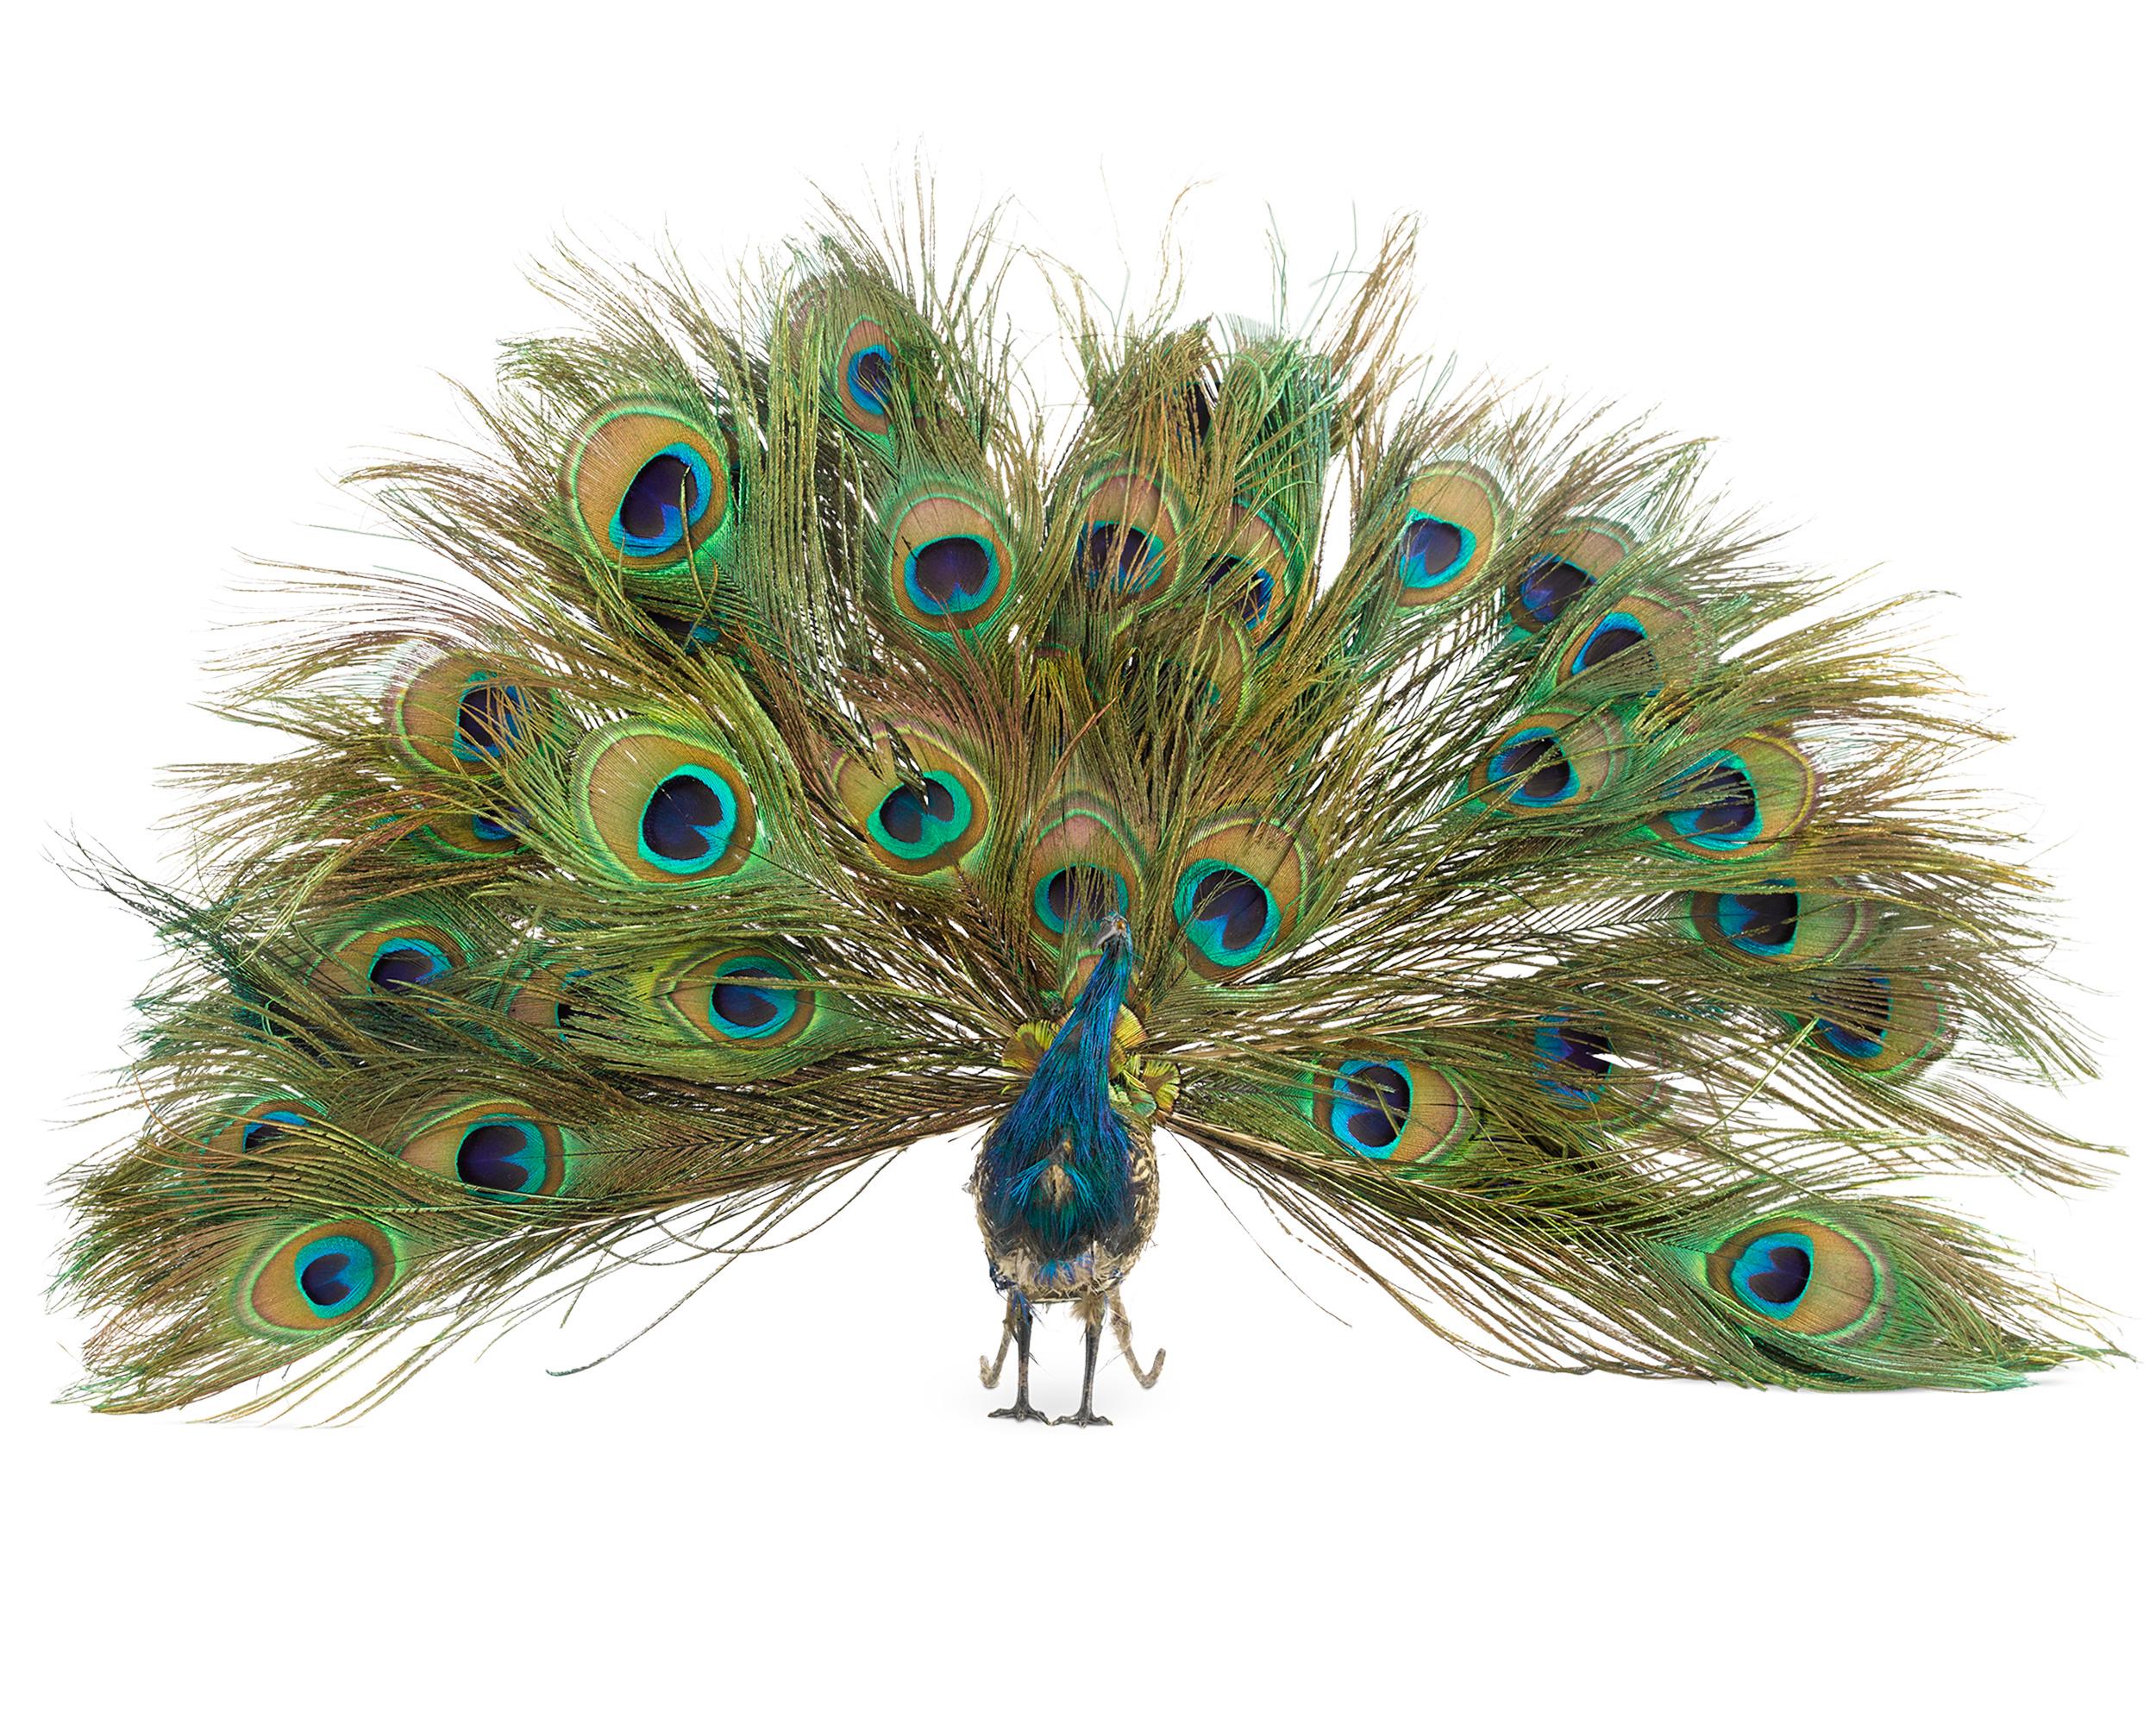 This absolutely spellbinding peacock automaton is attributed to the French toy-making company Roullet et Decamps. Its papier mâché body contains a highly elaborate clockwork system that allows this handsome bird to come fully to life. When wound and